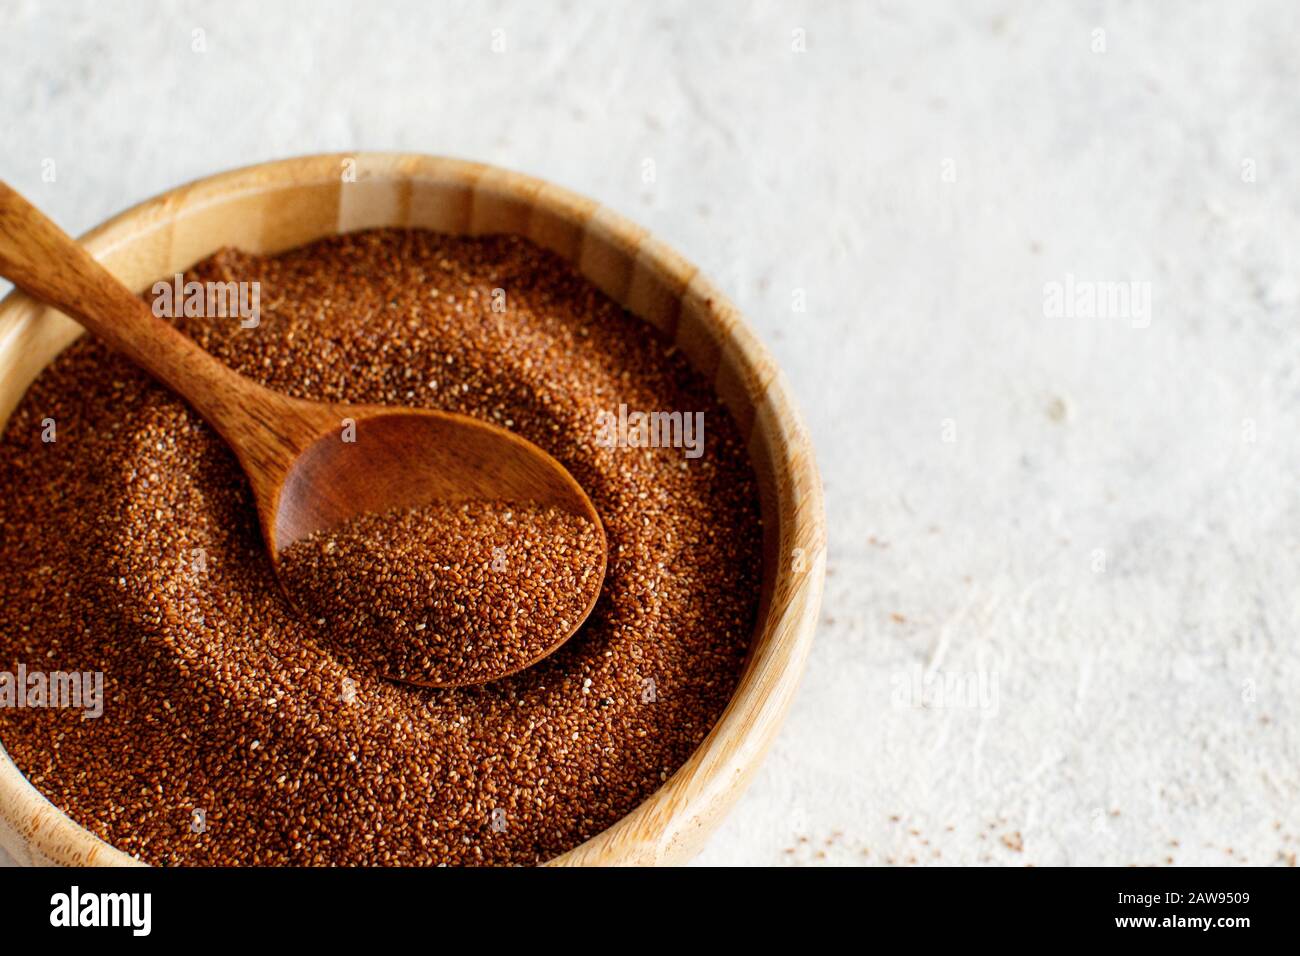 Uncooked teff grain with a wooden spoon close up Stock Photo